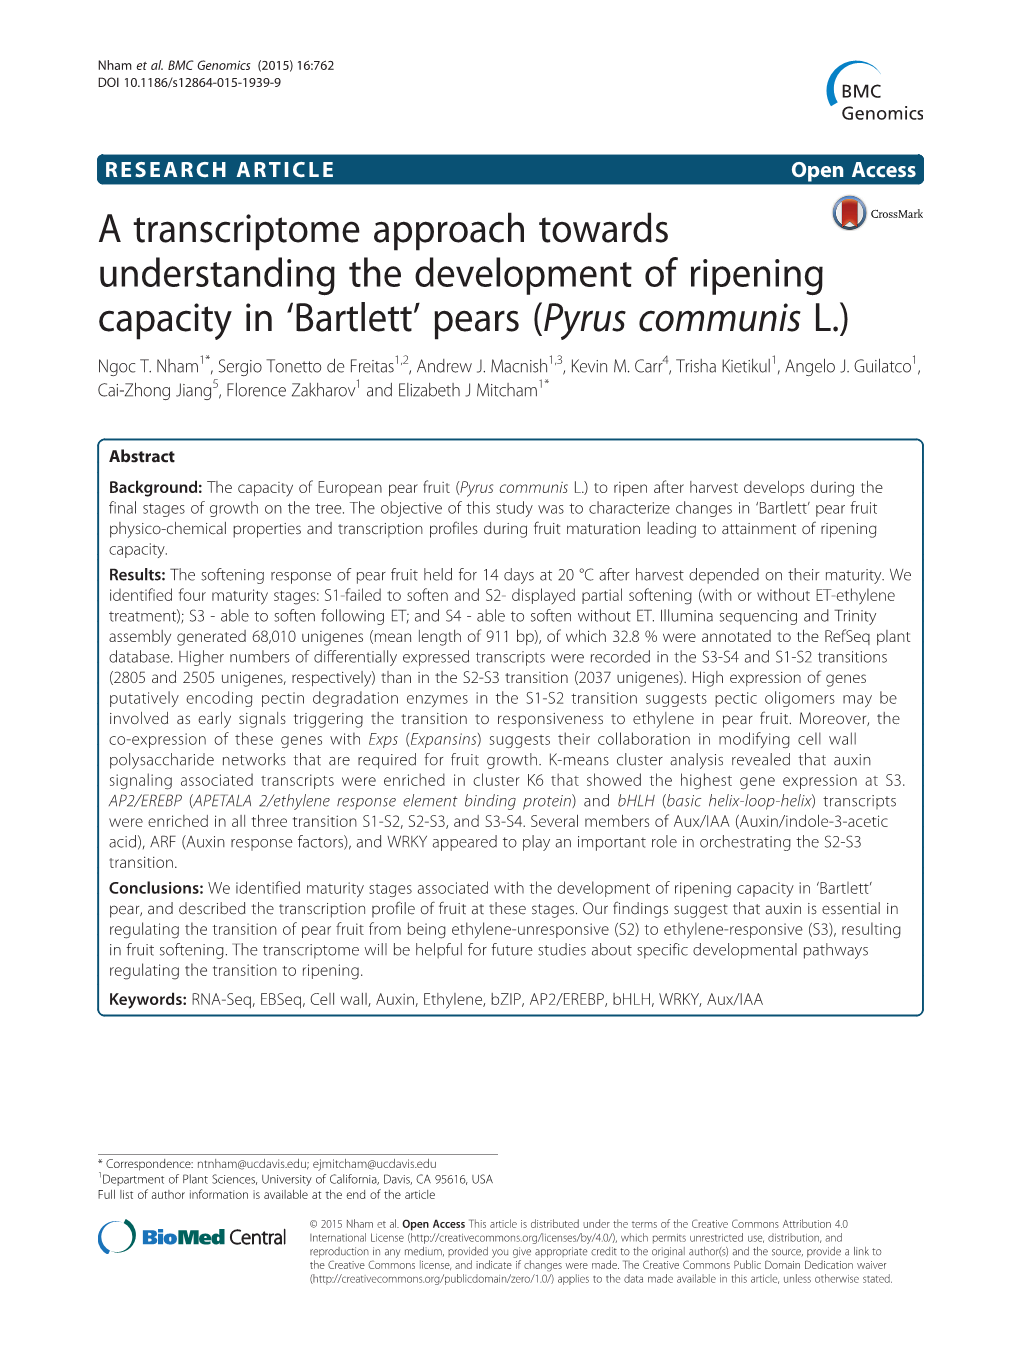 A Transcriptome Approach Towards Understanding the Development of Ripening Capacity in ‘Bartlett’ Pears (Pyrus Communis L.) Ngoc T